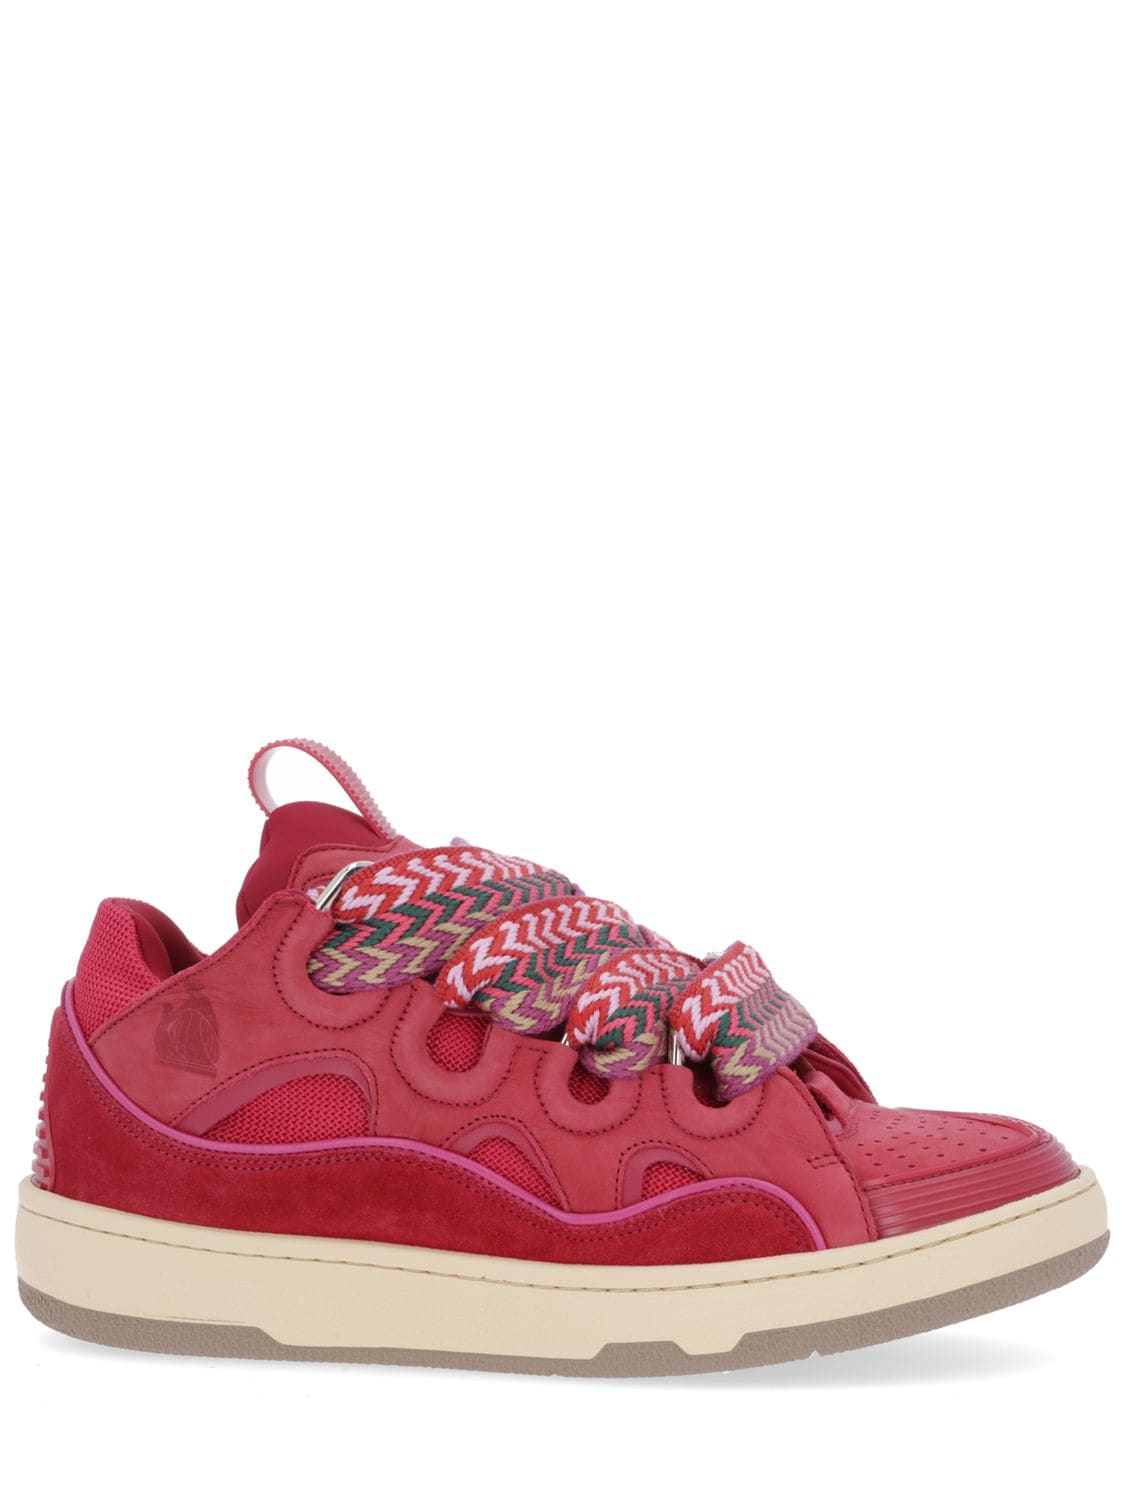 Lanvin 30mm Curb Leather & Mesh Sneakers In Red